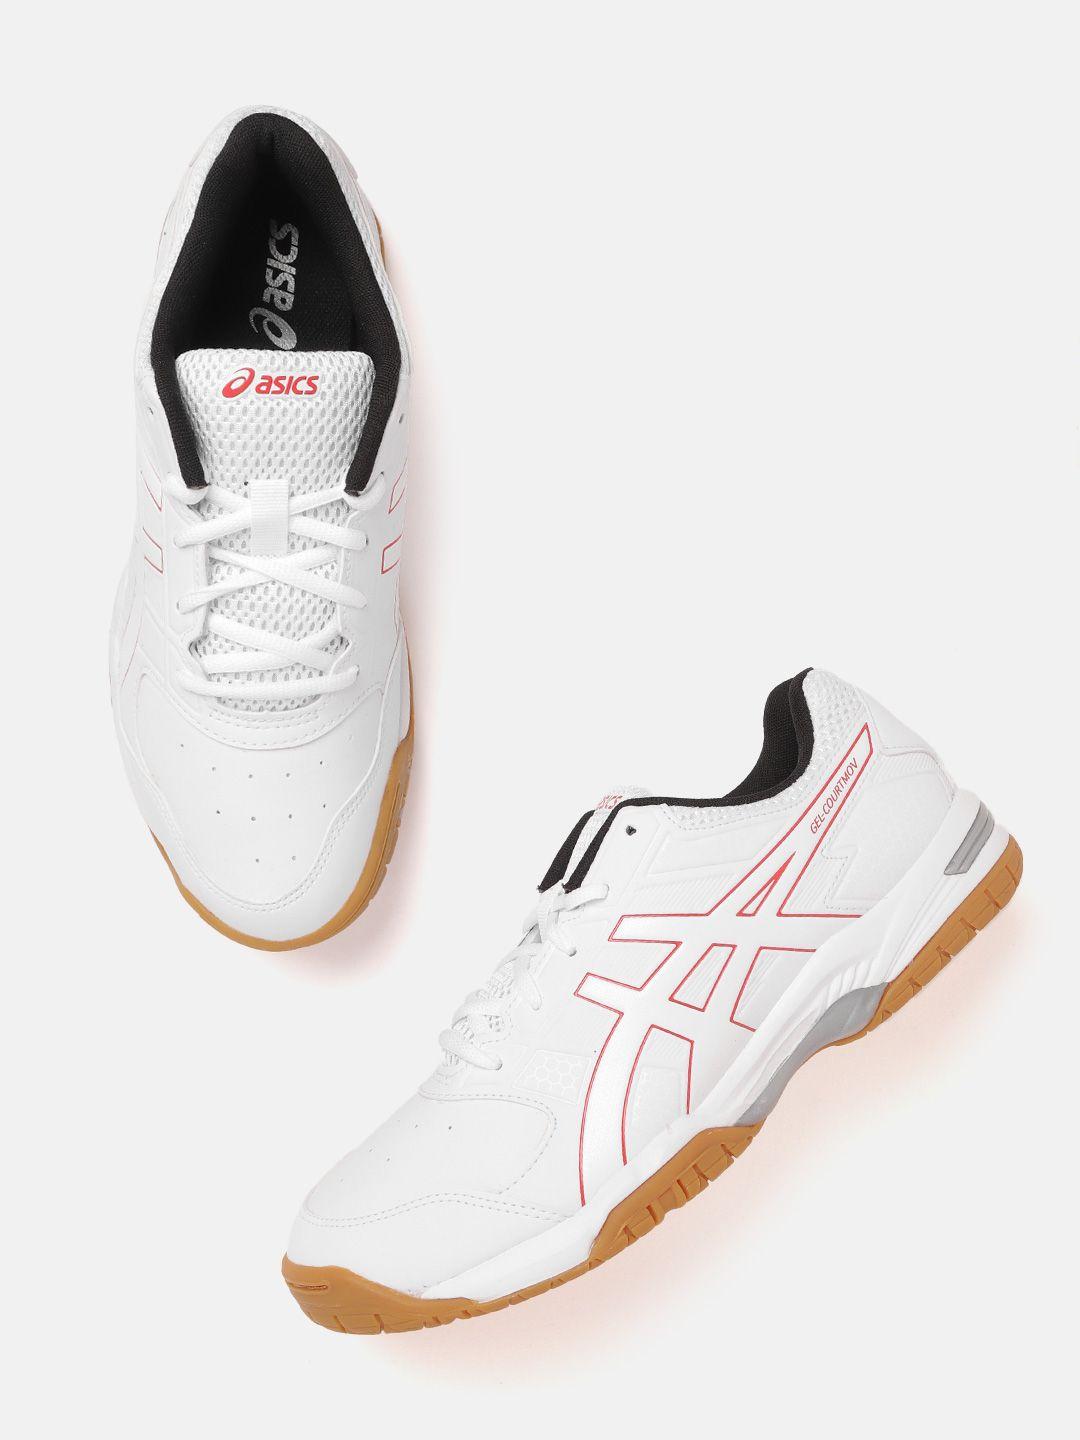 asics-men-white-&-red-perforated-gel-courtmov-badminton-shoes